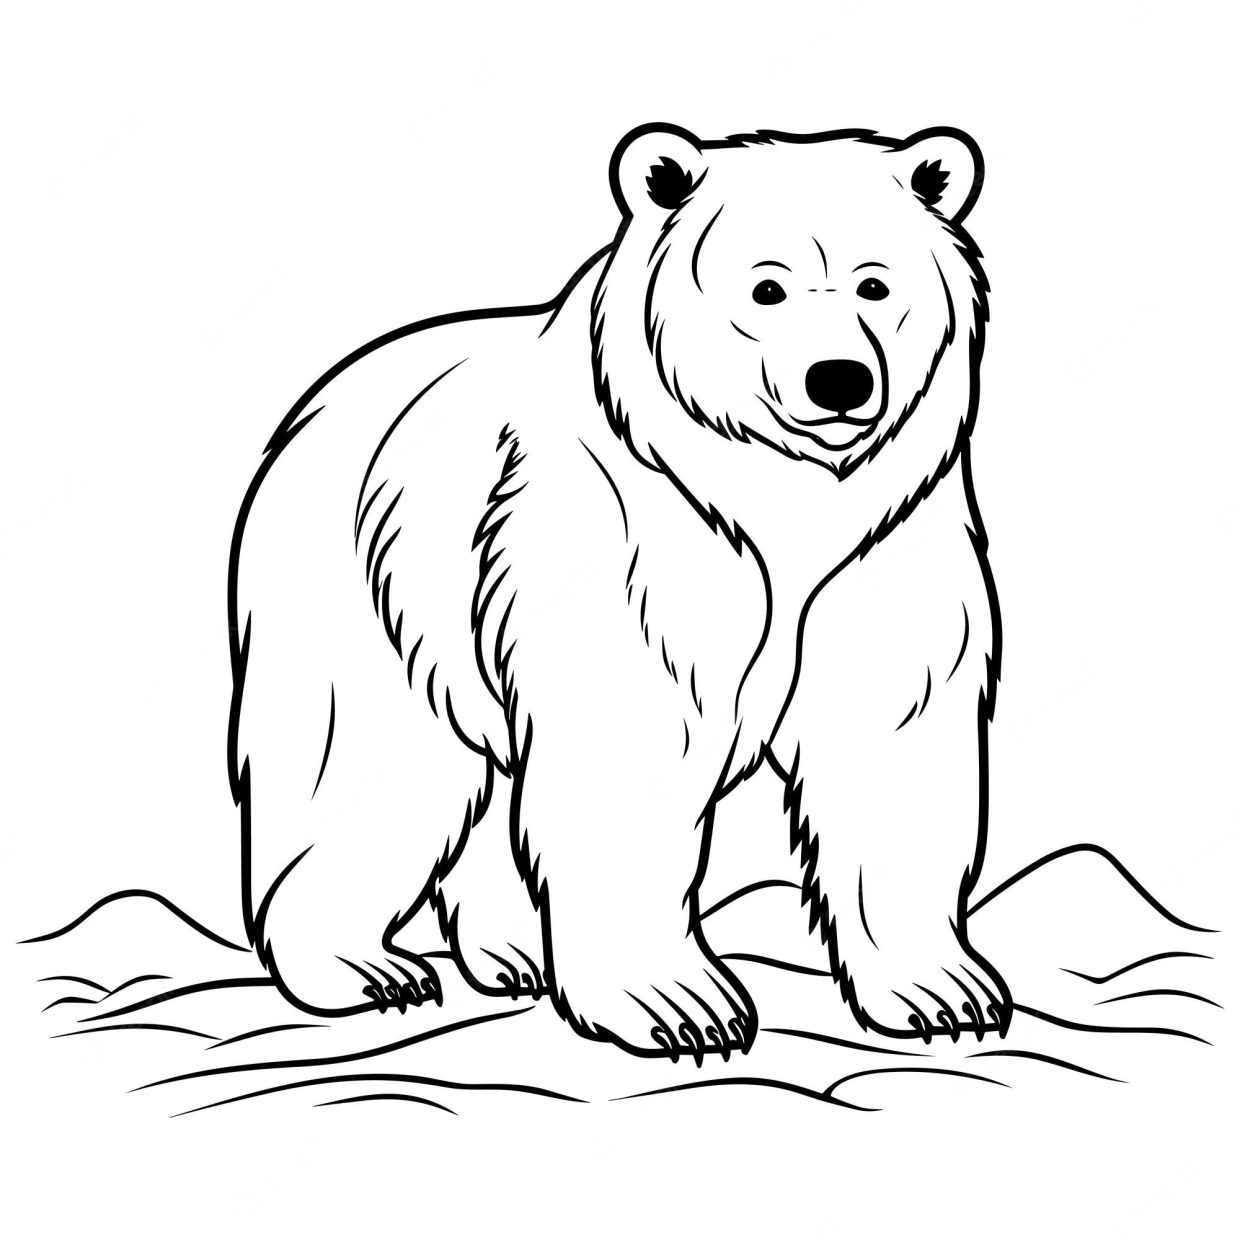 Explore the wild with free printable bear coloring pages